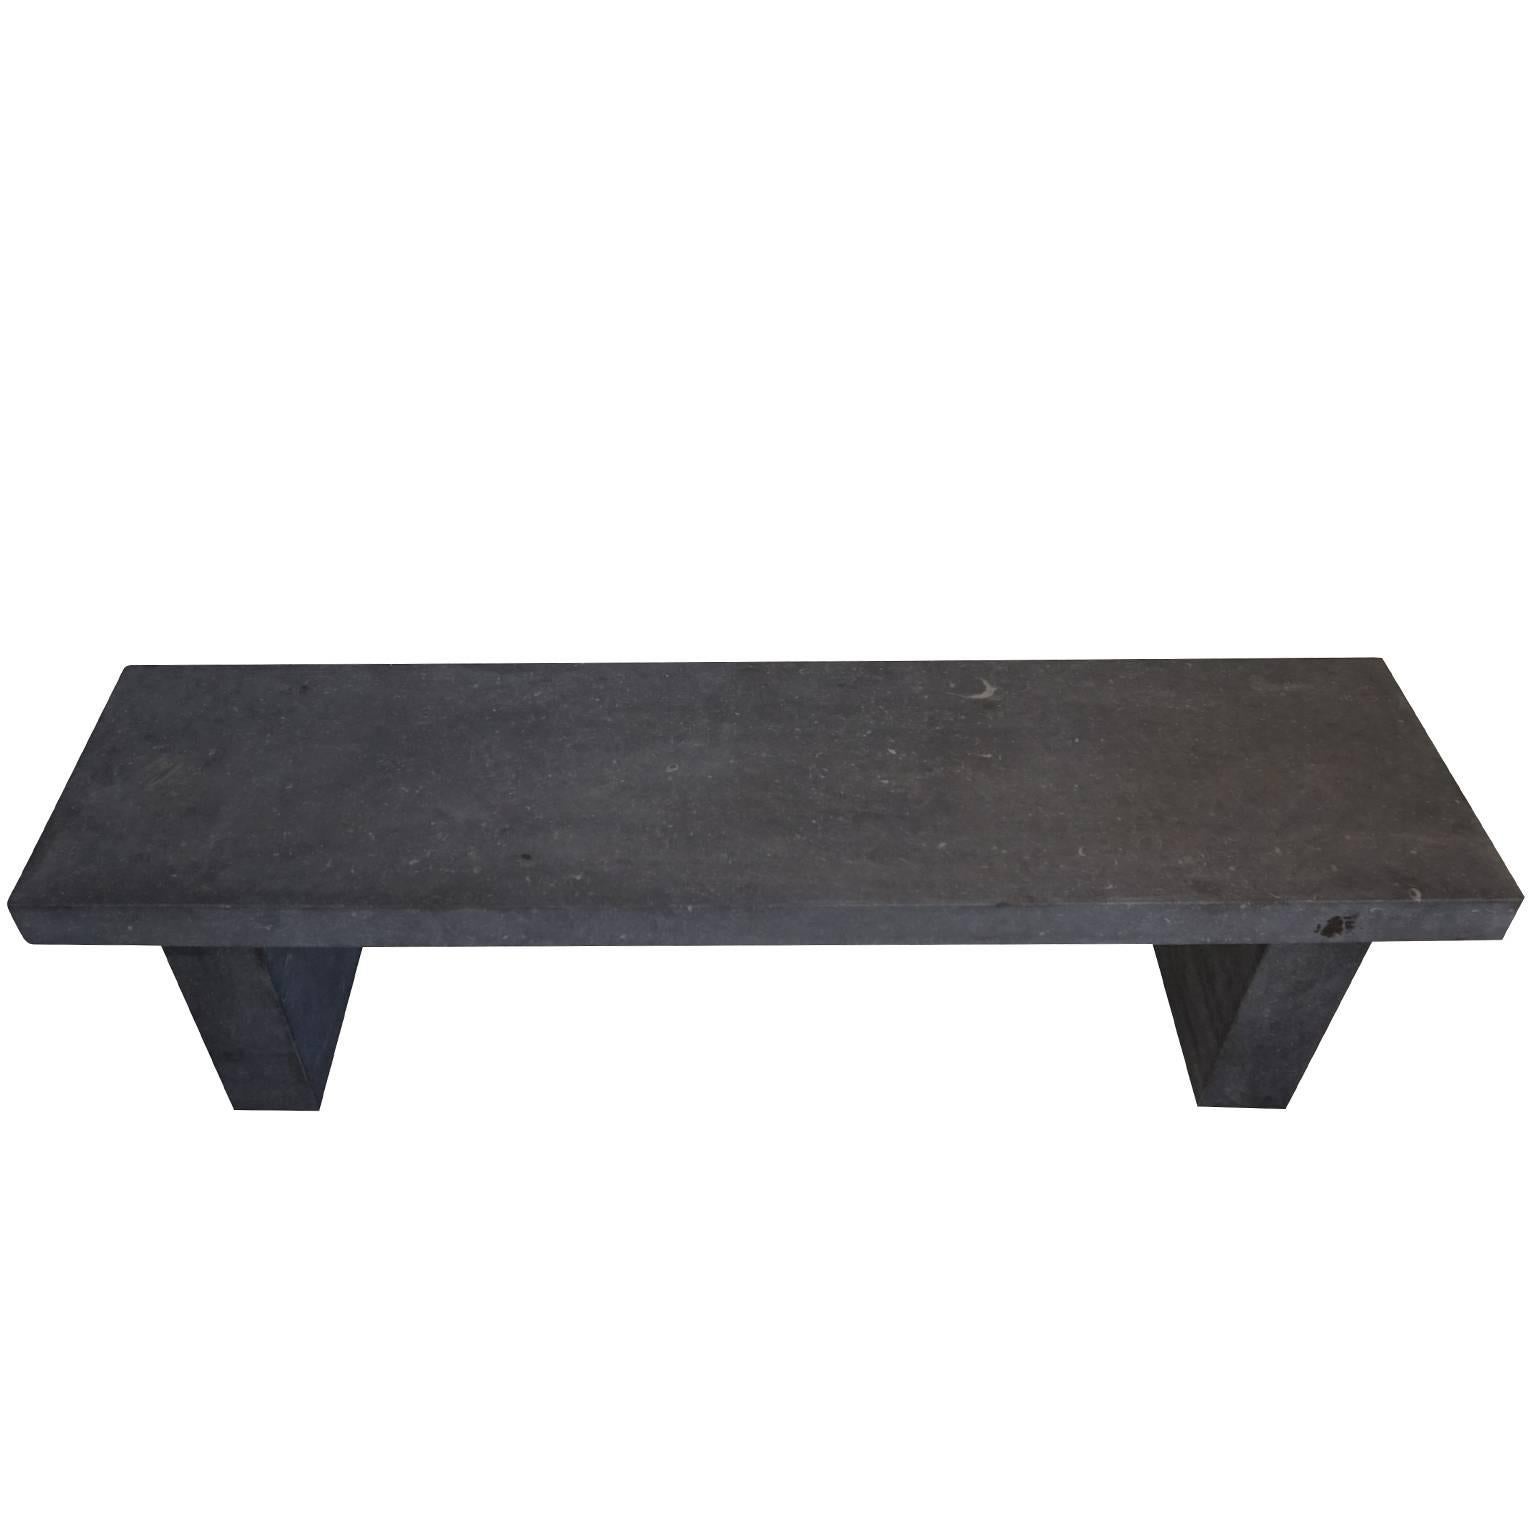 Belgian blue stone bench, designed in a clean and contemporary manner. The beautiful natural stone shows well, as the design is very so simple. Square cut with an eased edge, heavy beveled bench top with 4.5